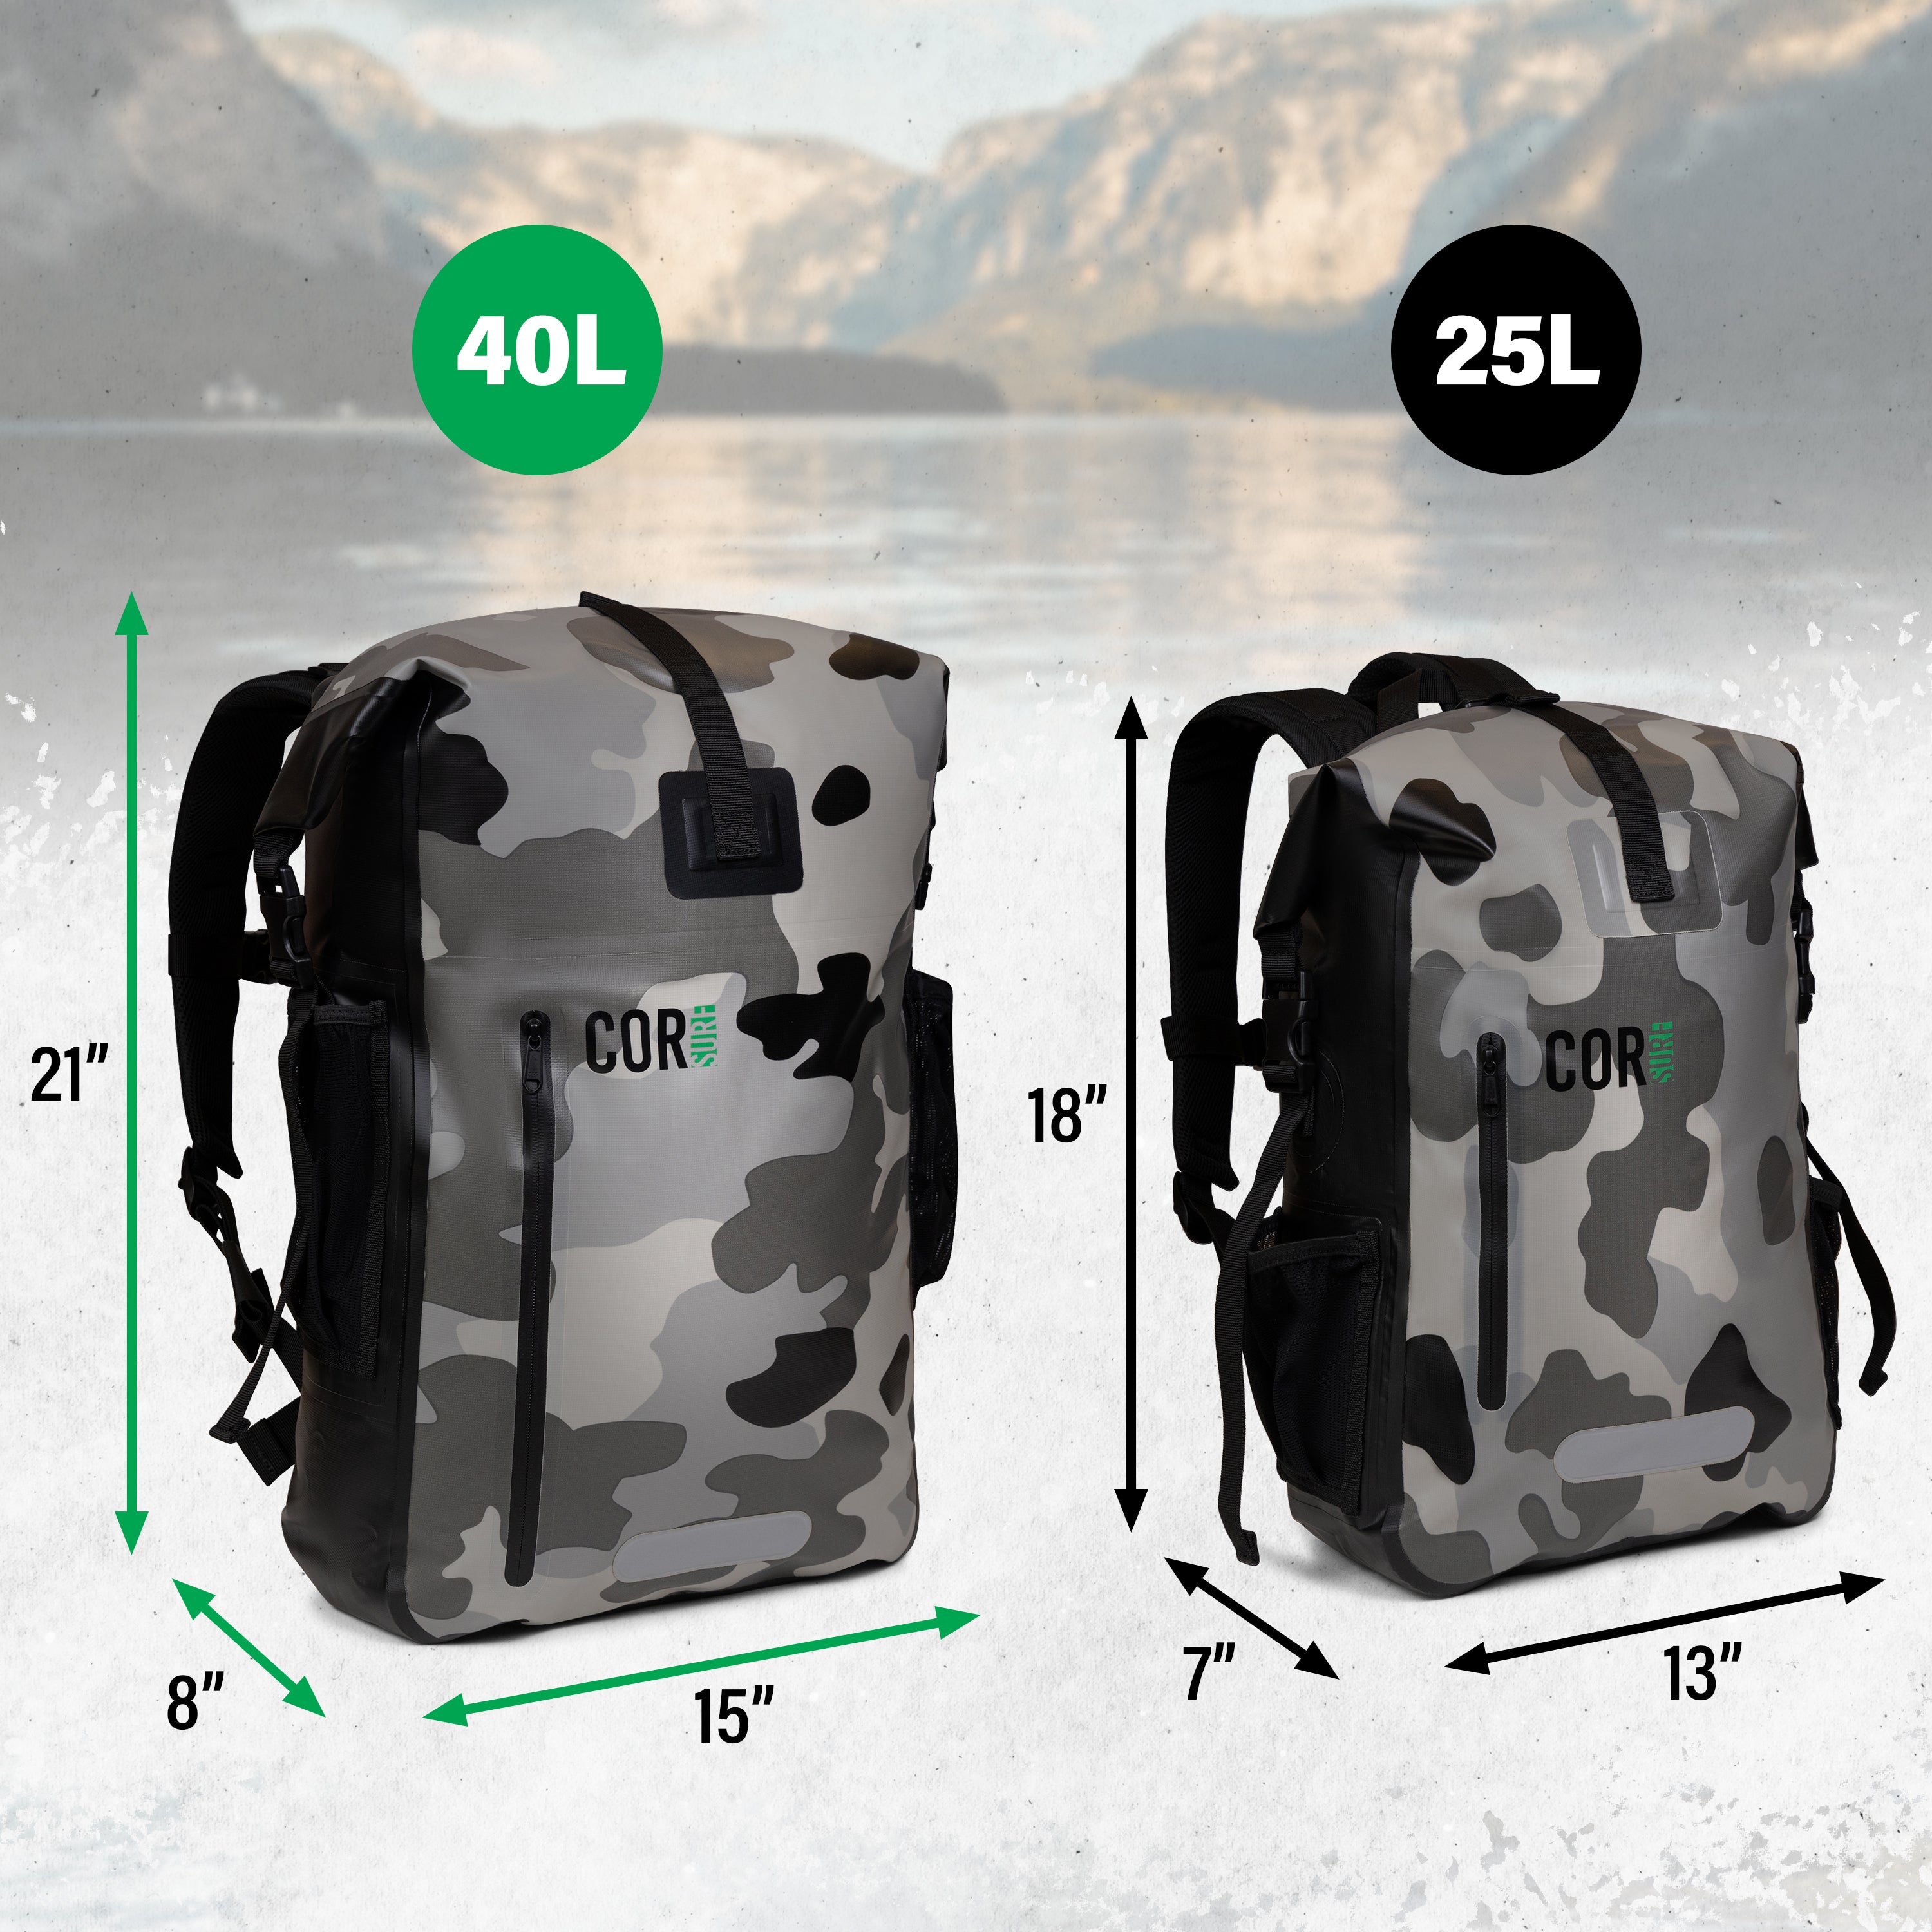 cor surf waterproof dry backpack size chart for 25L & 40L